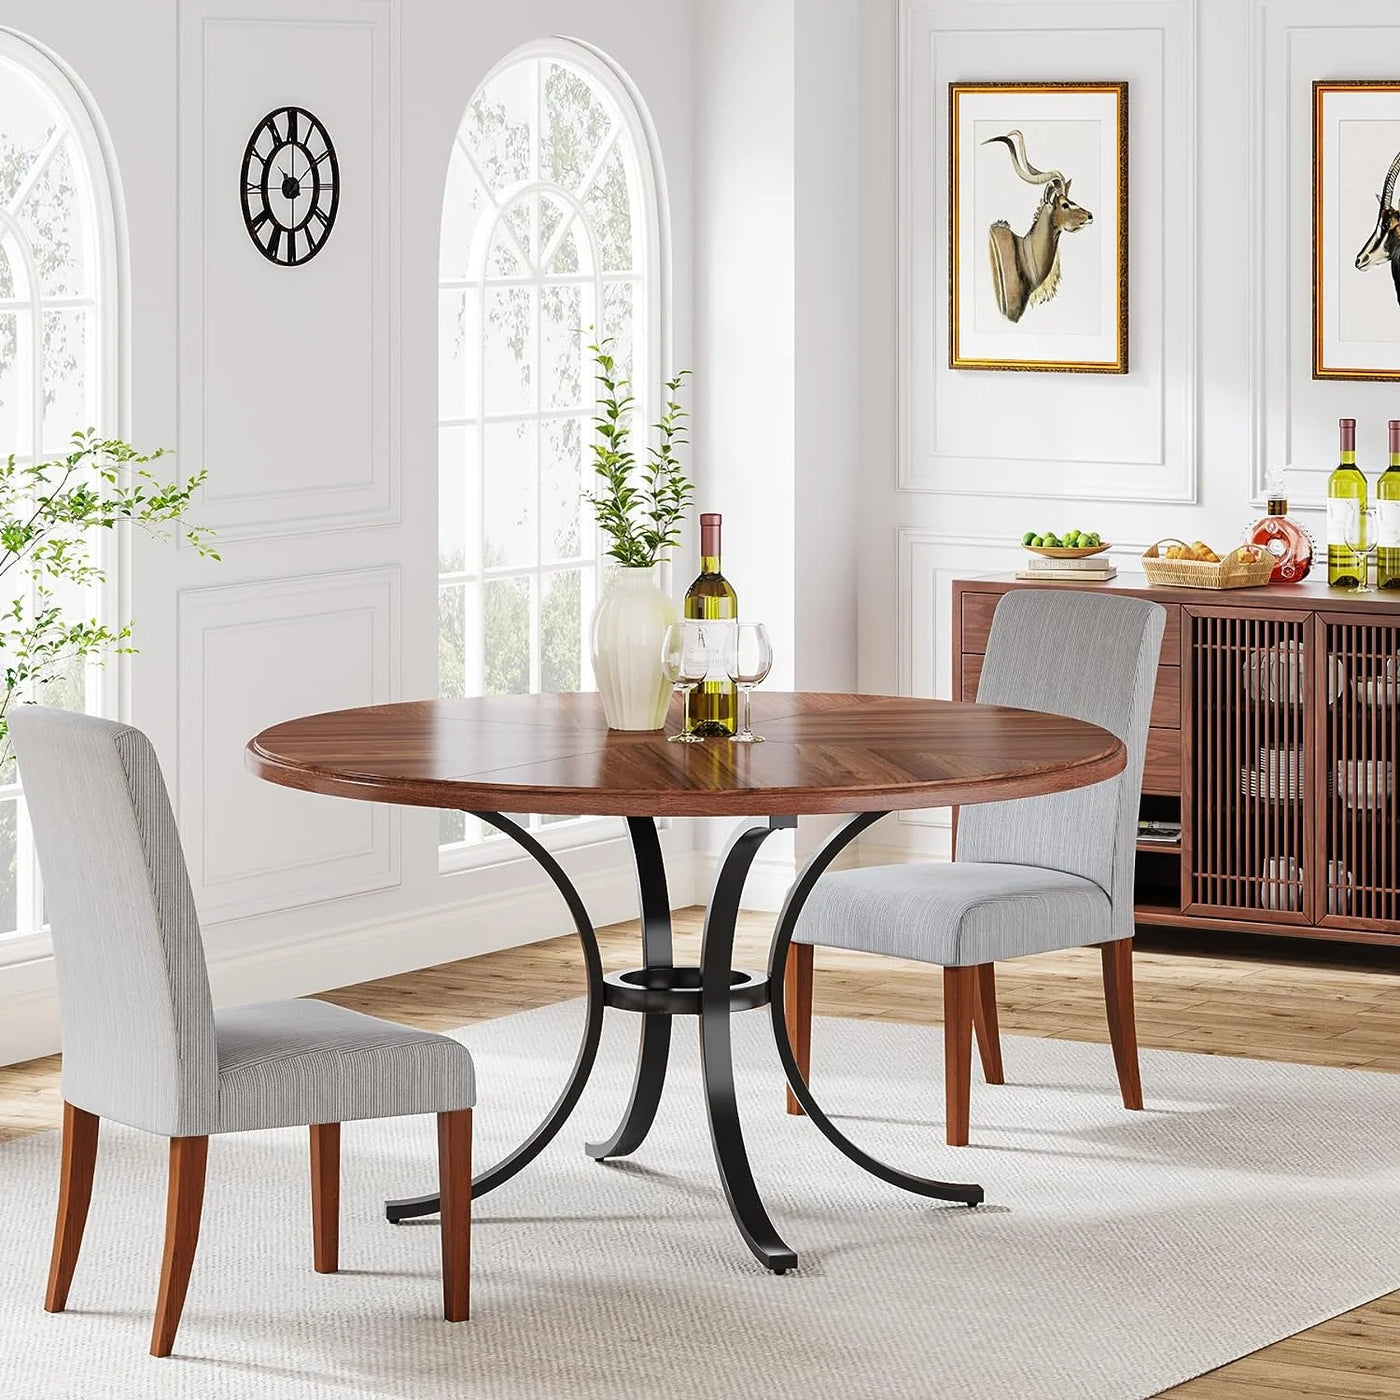 Antonette Round Dining Table for 4-6 People | 47" Wood Modern Kitchen Table